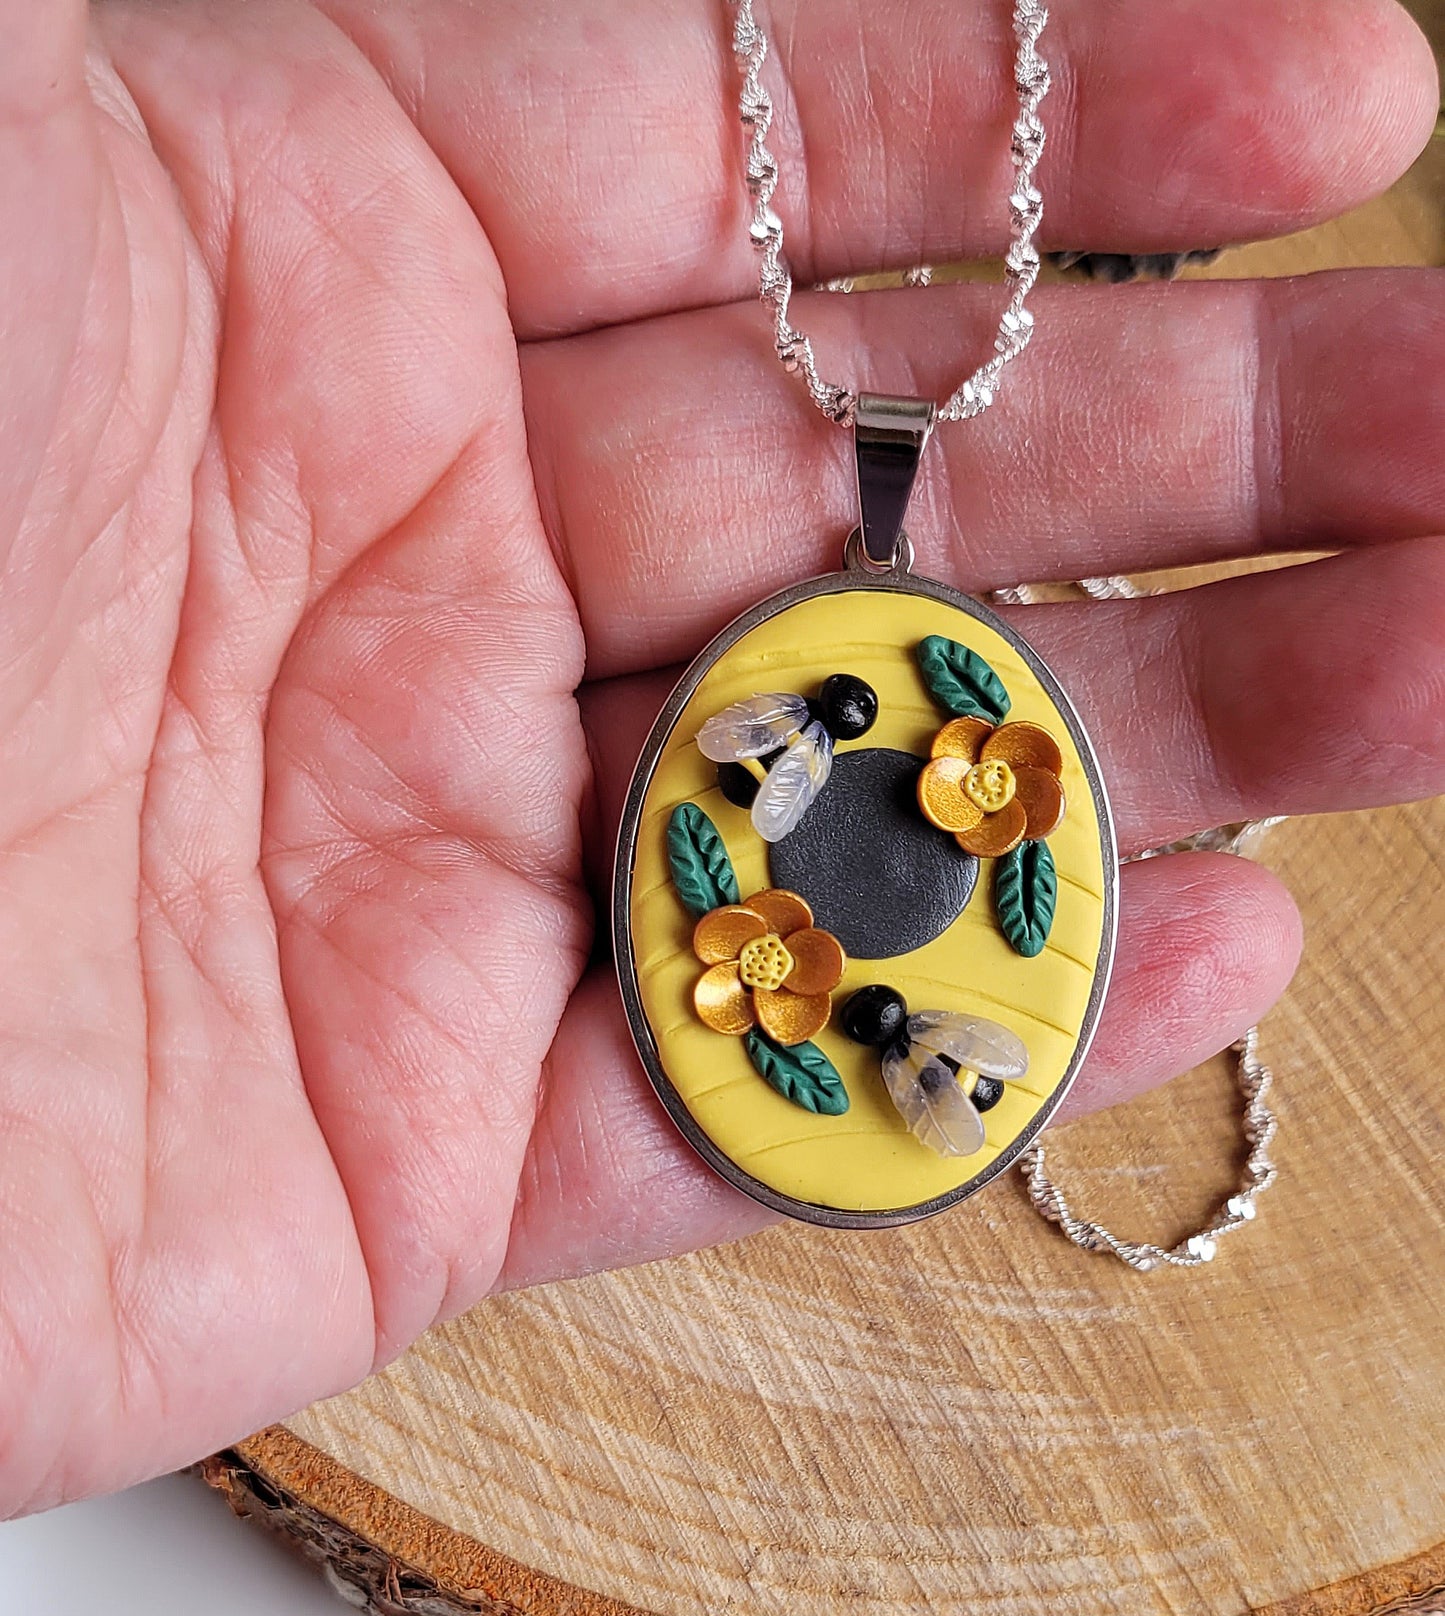 Beehive pendant| Beehive necklace| Summer jewelry necklace